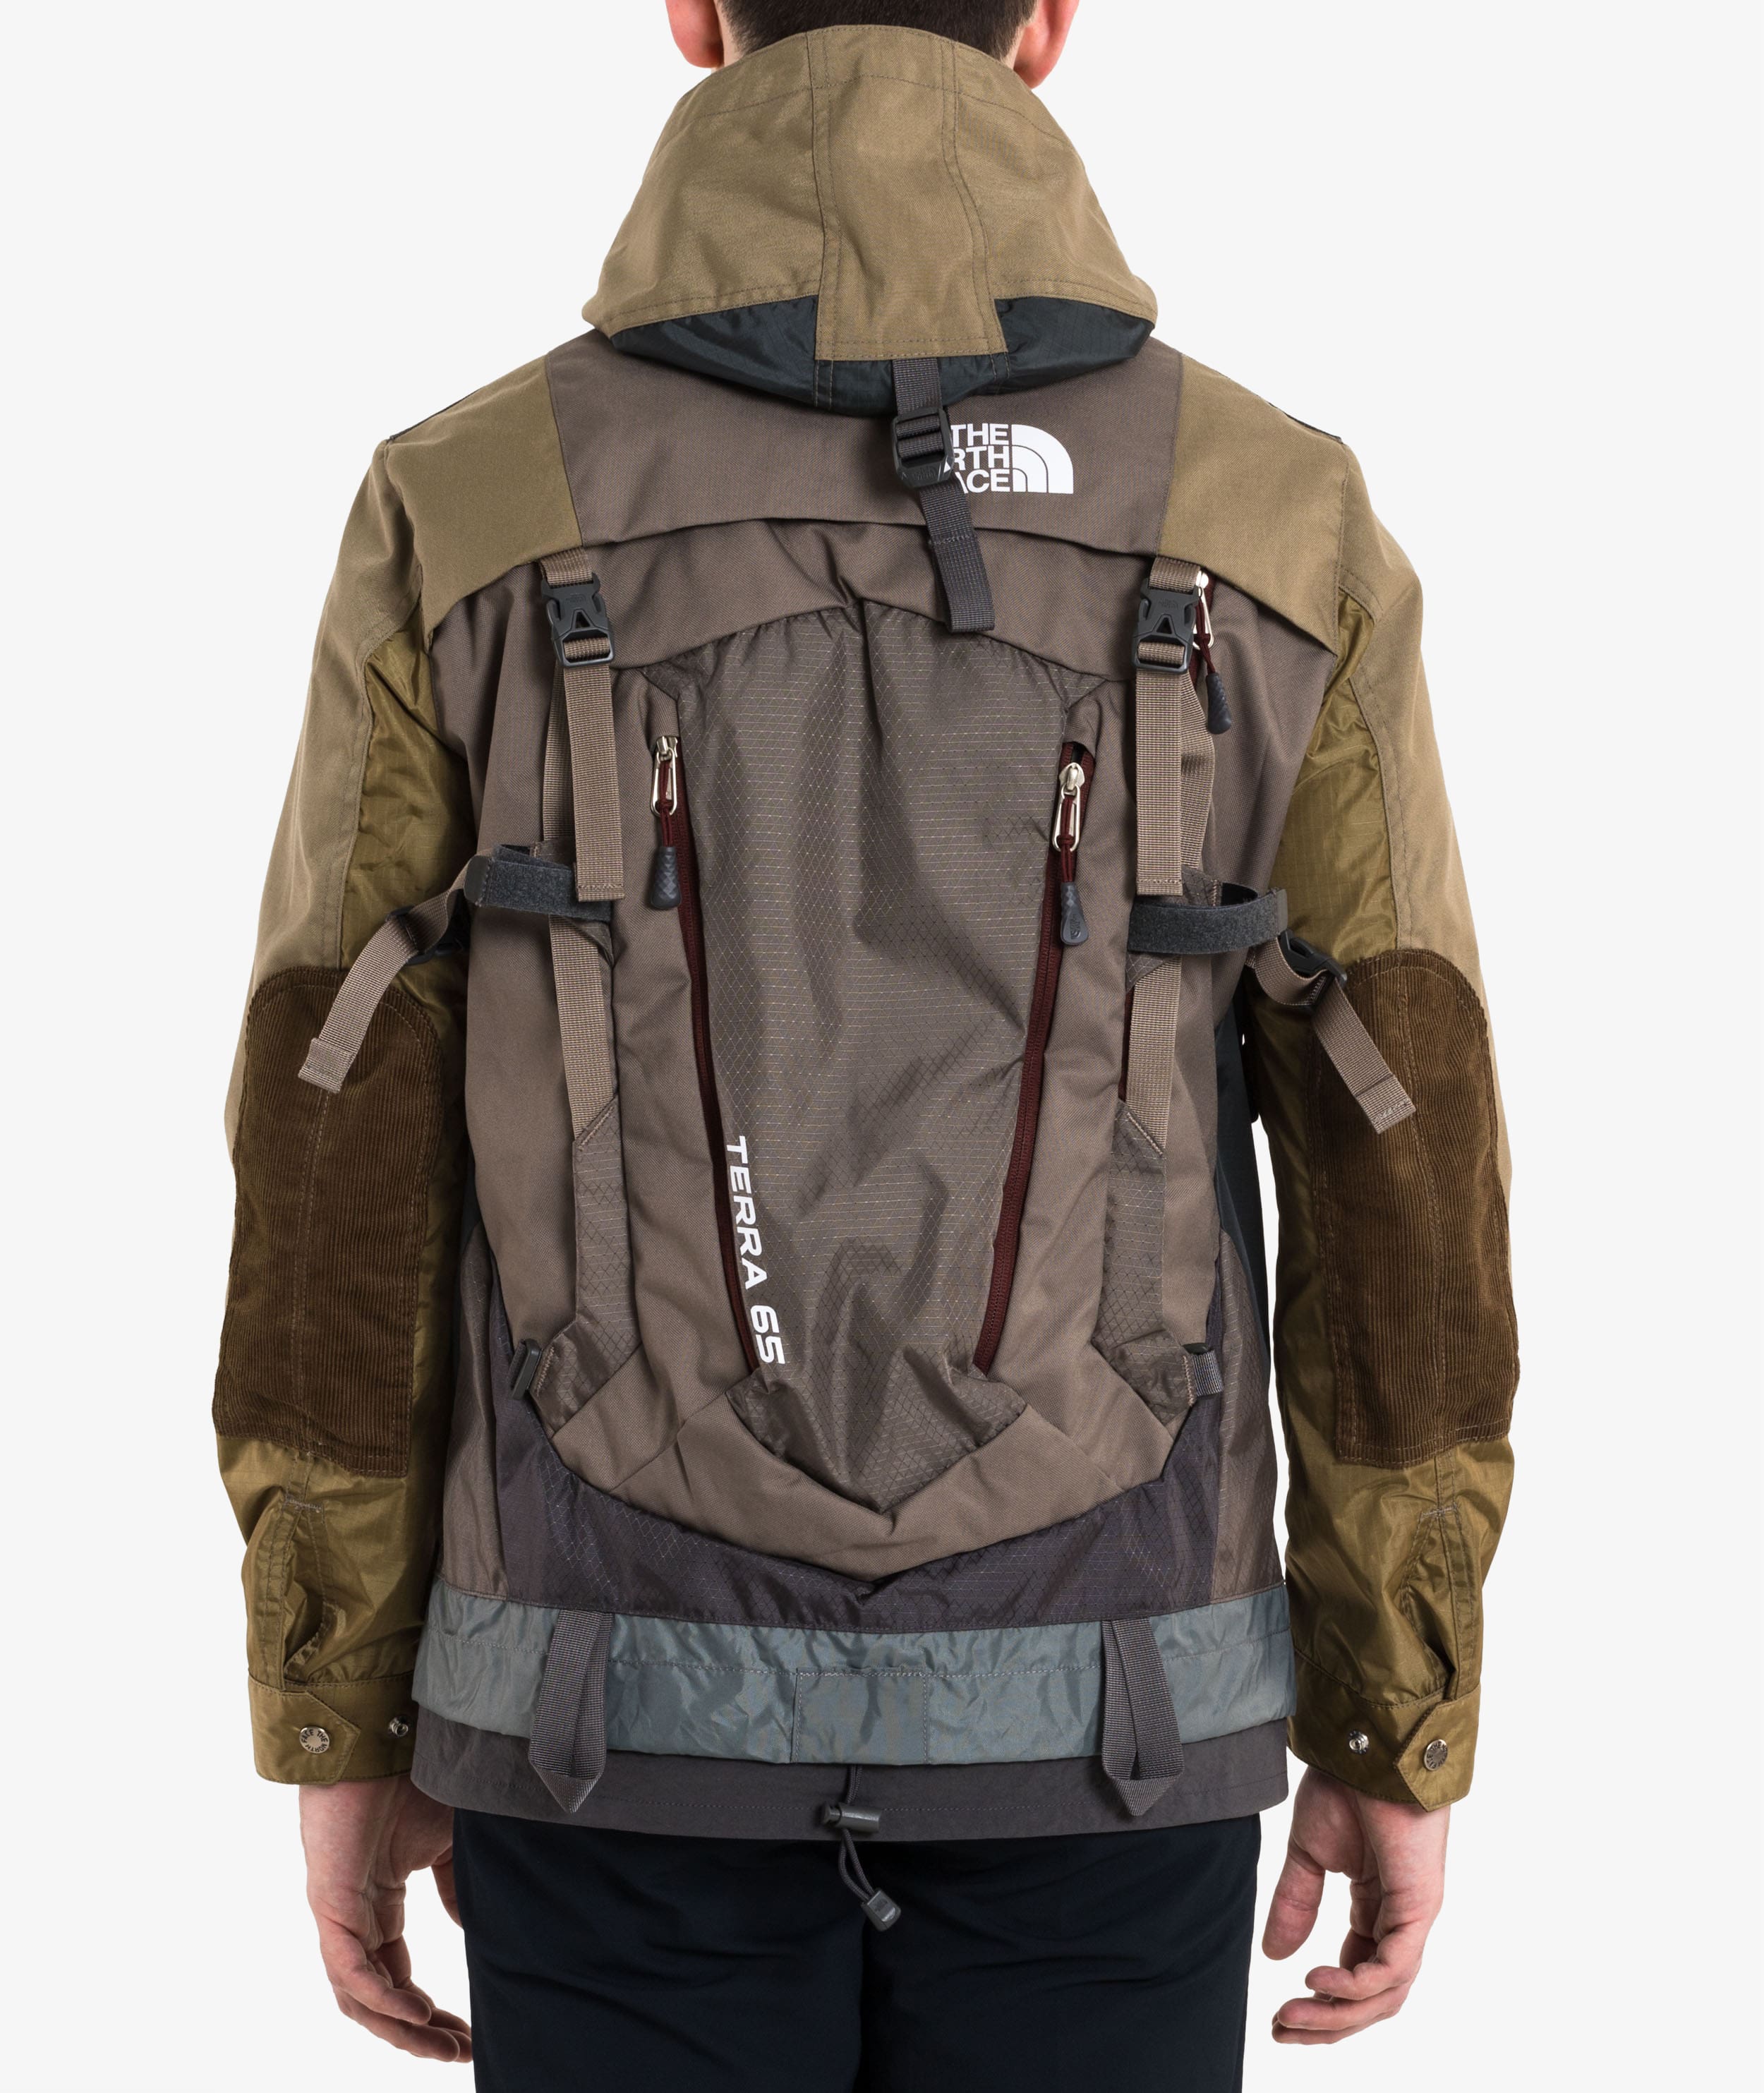 The North Face Archives - Soldier Systems Daily